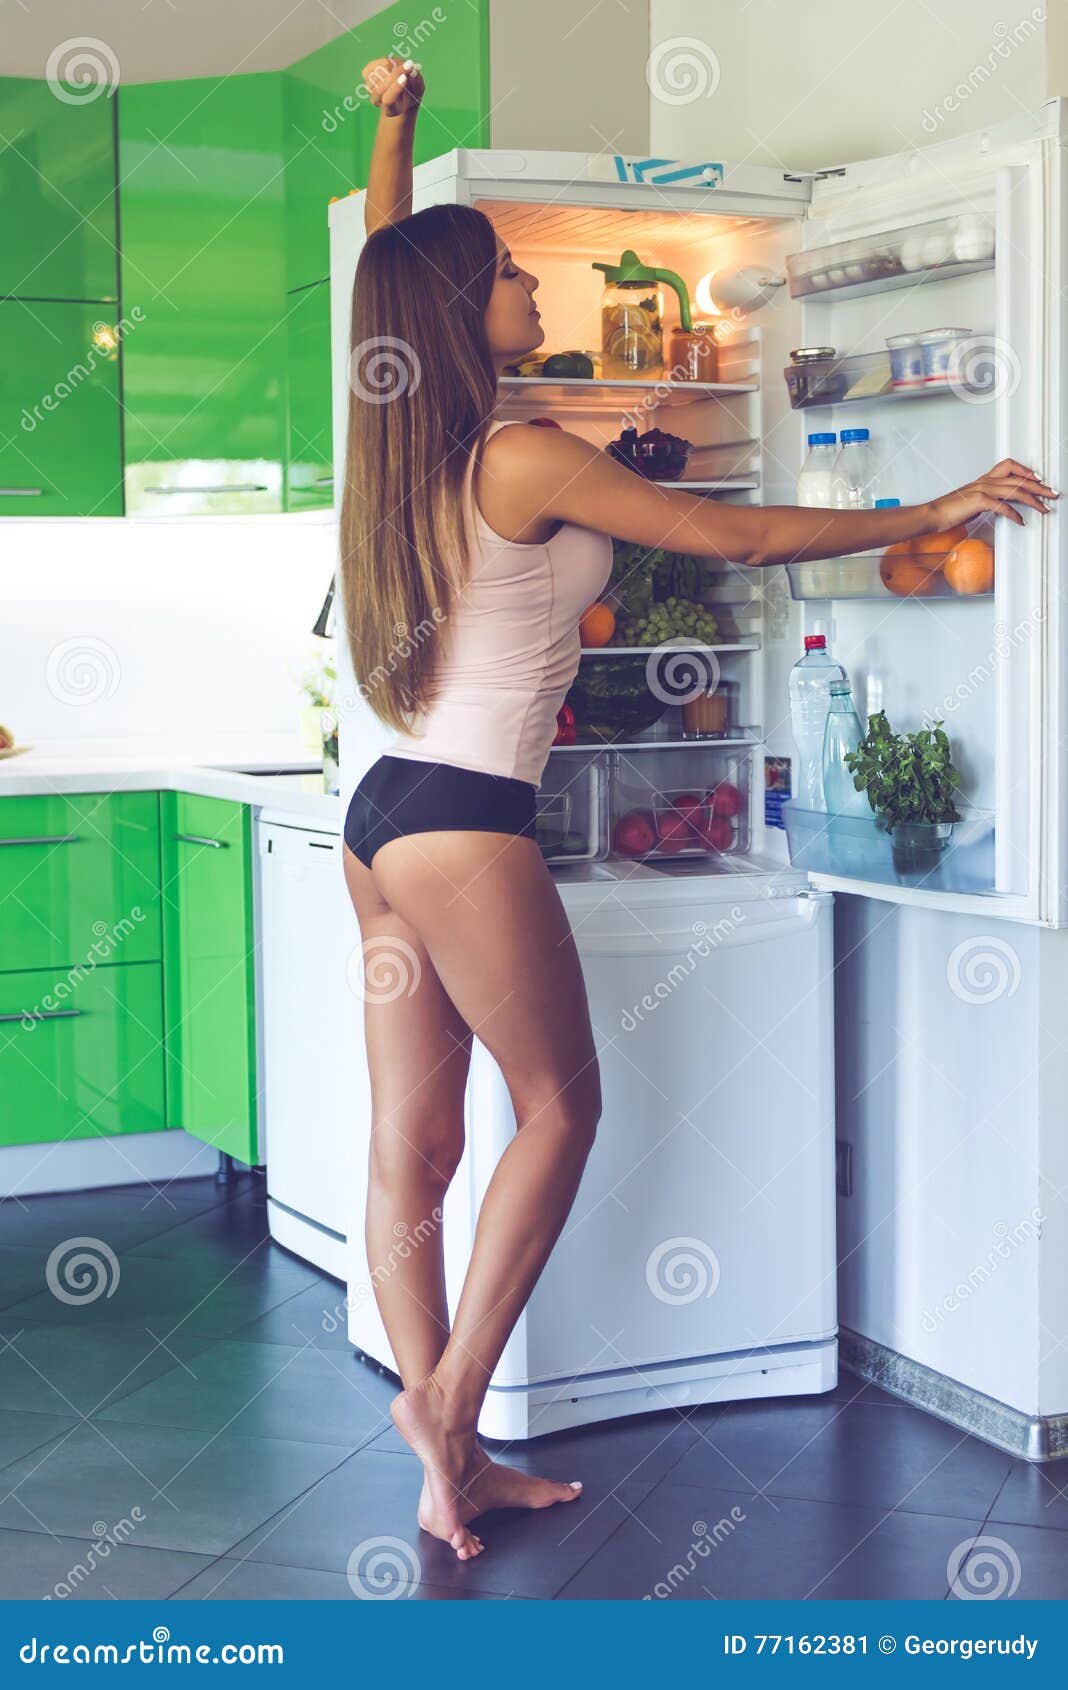 Beautiful Girl In The Kitchen Stock Image Image Of Fres